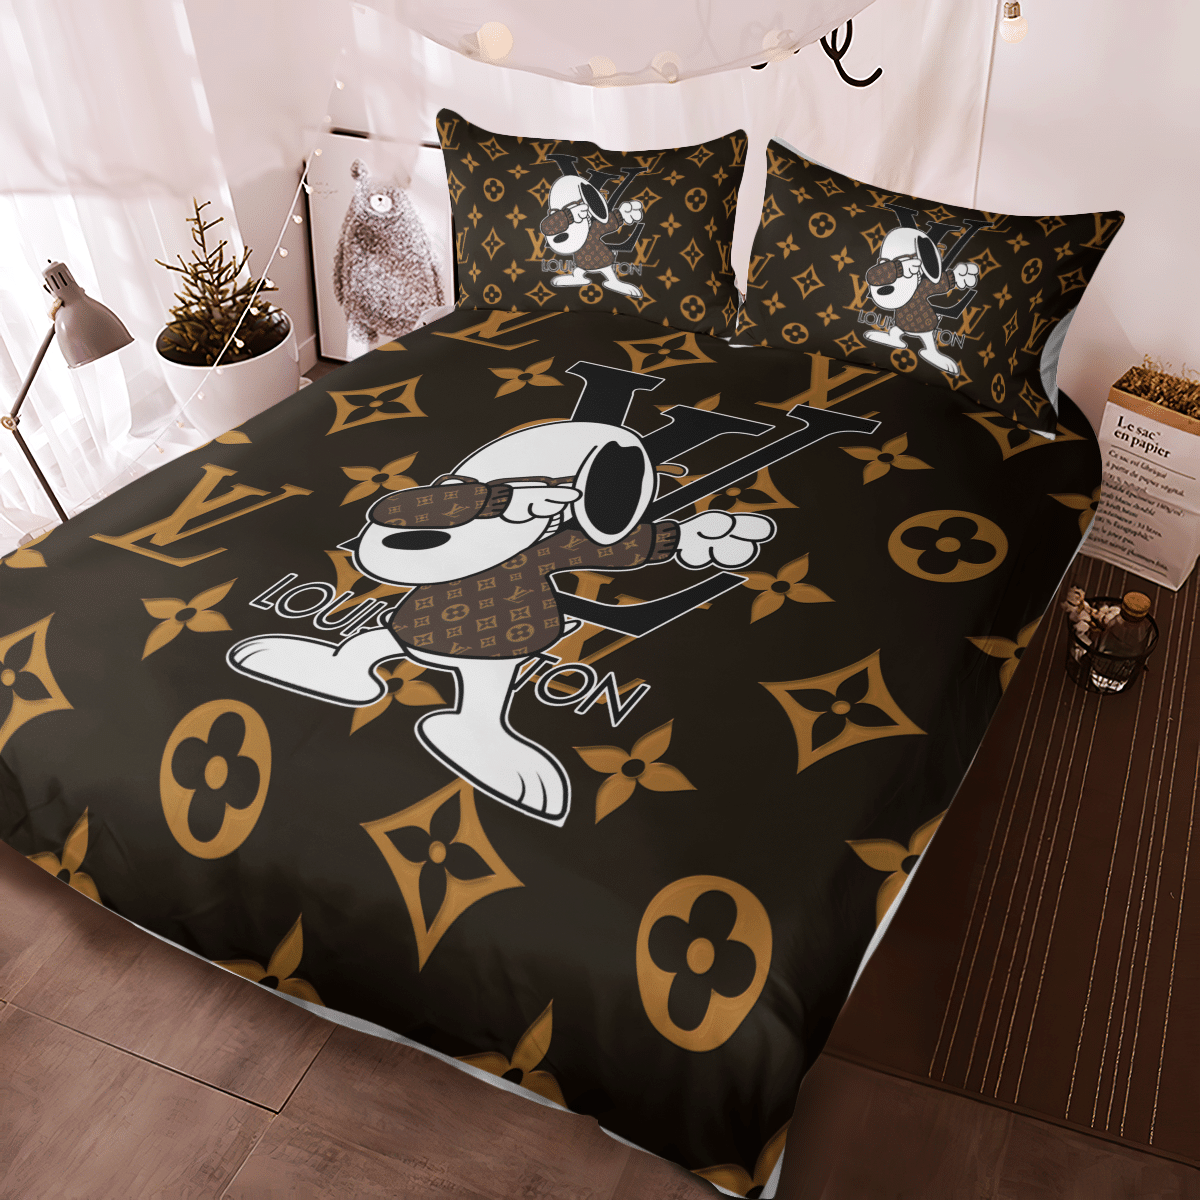 Bedset7 Limited Edition 3D Customized Bedding Sets – Gift4Family